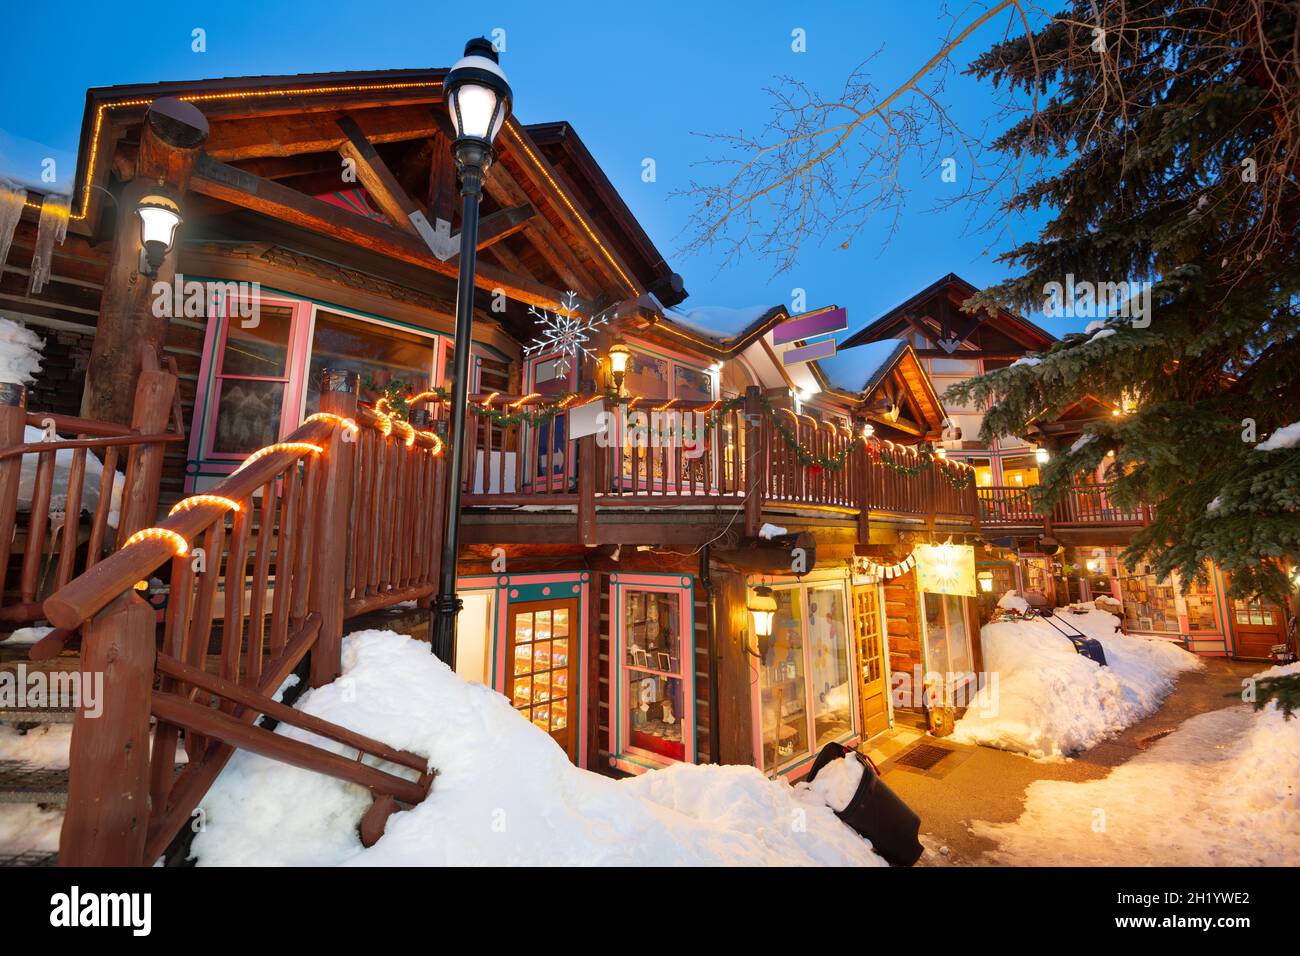 Breckenridge, Colorado, USA downtown streets at night in the winter with holiday lighting. Stock Photo